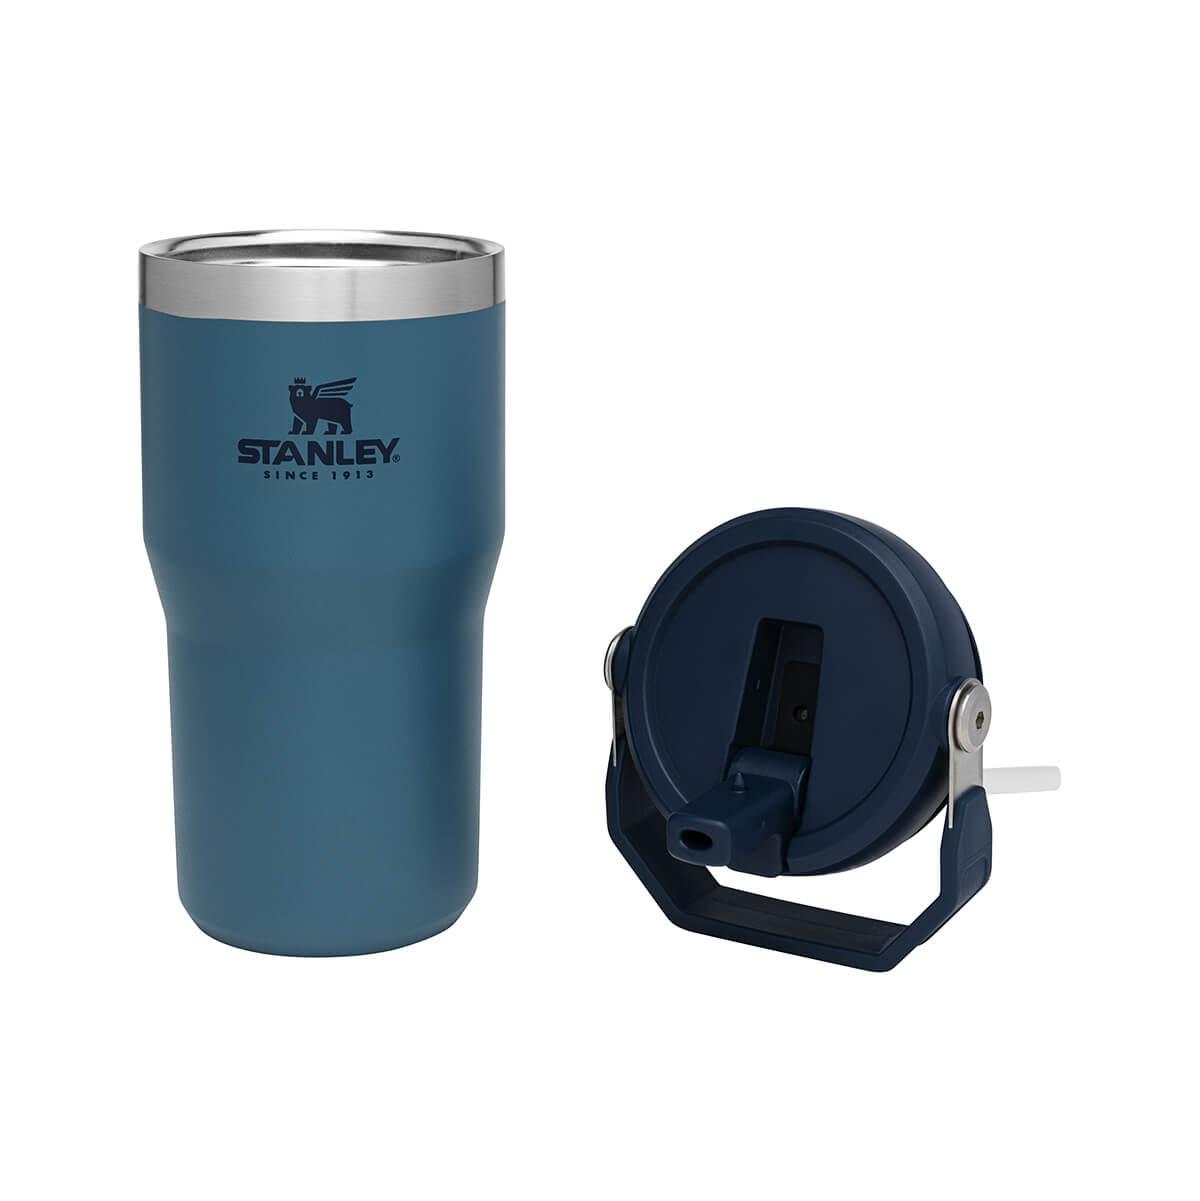 Stanley Master Flask, 8 oz.  Drinkware & Thermoses at L.L.Bean